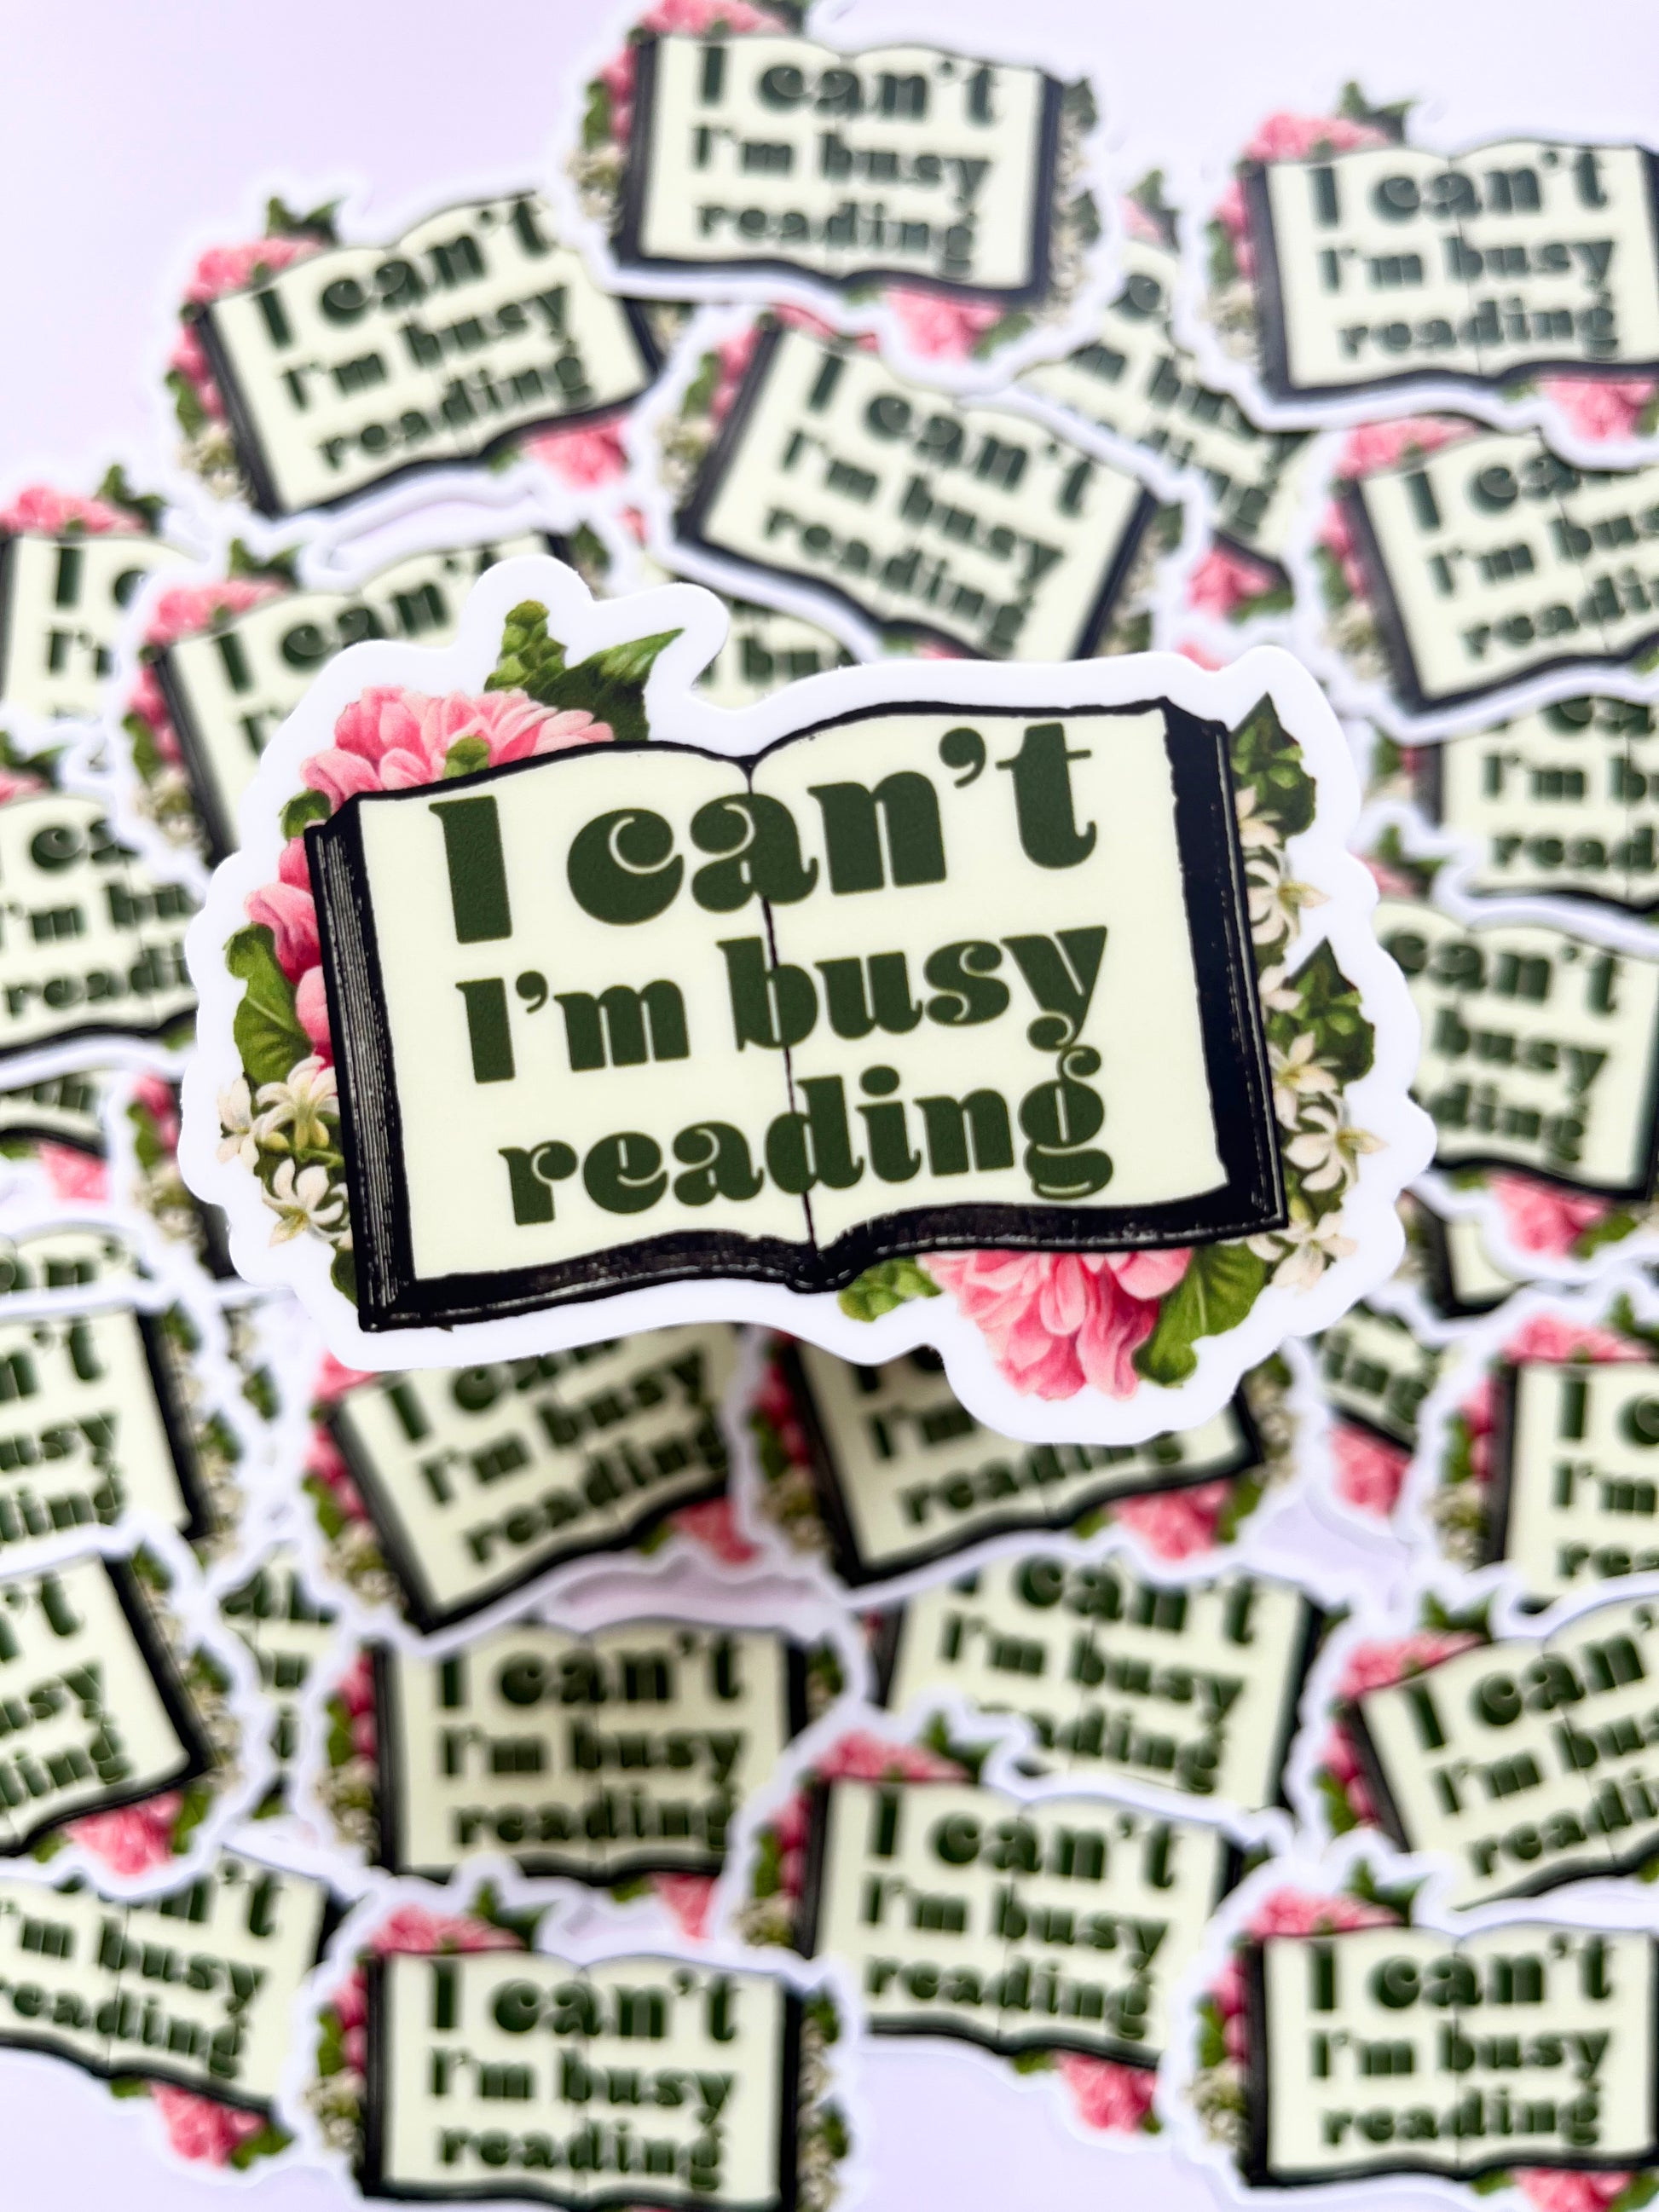 funny sticker i can't i'm busy reading book flowers pink yellow green open book vintage style sticker decal coin laundry montana